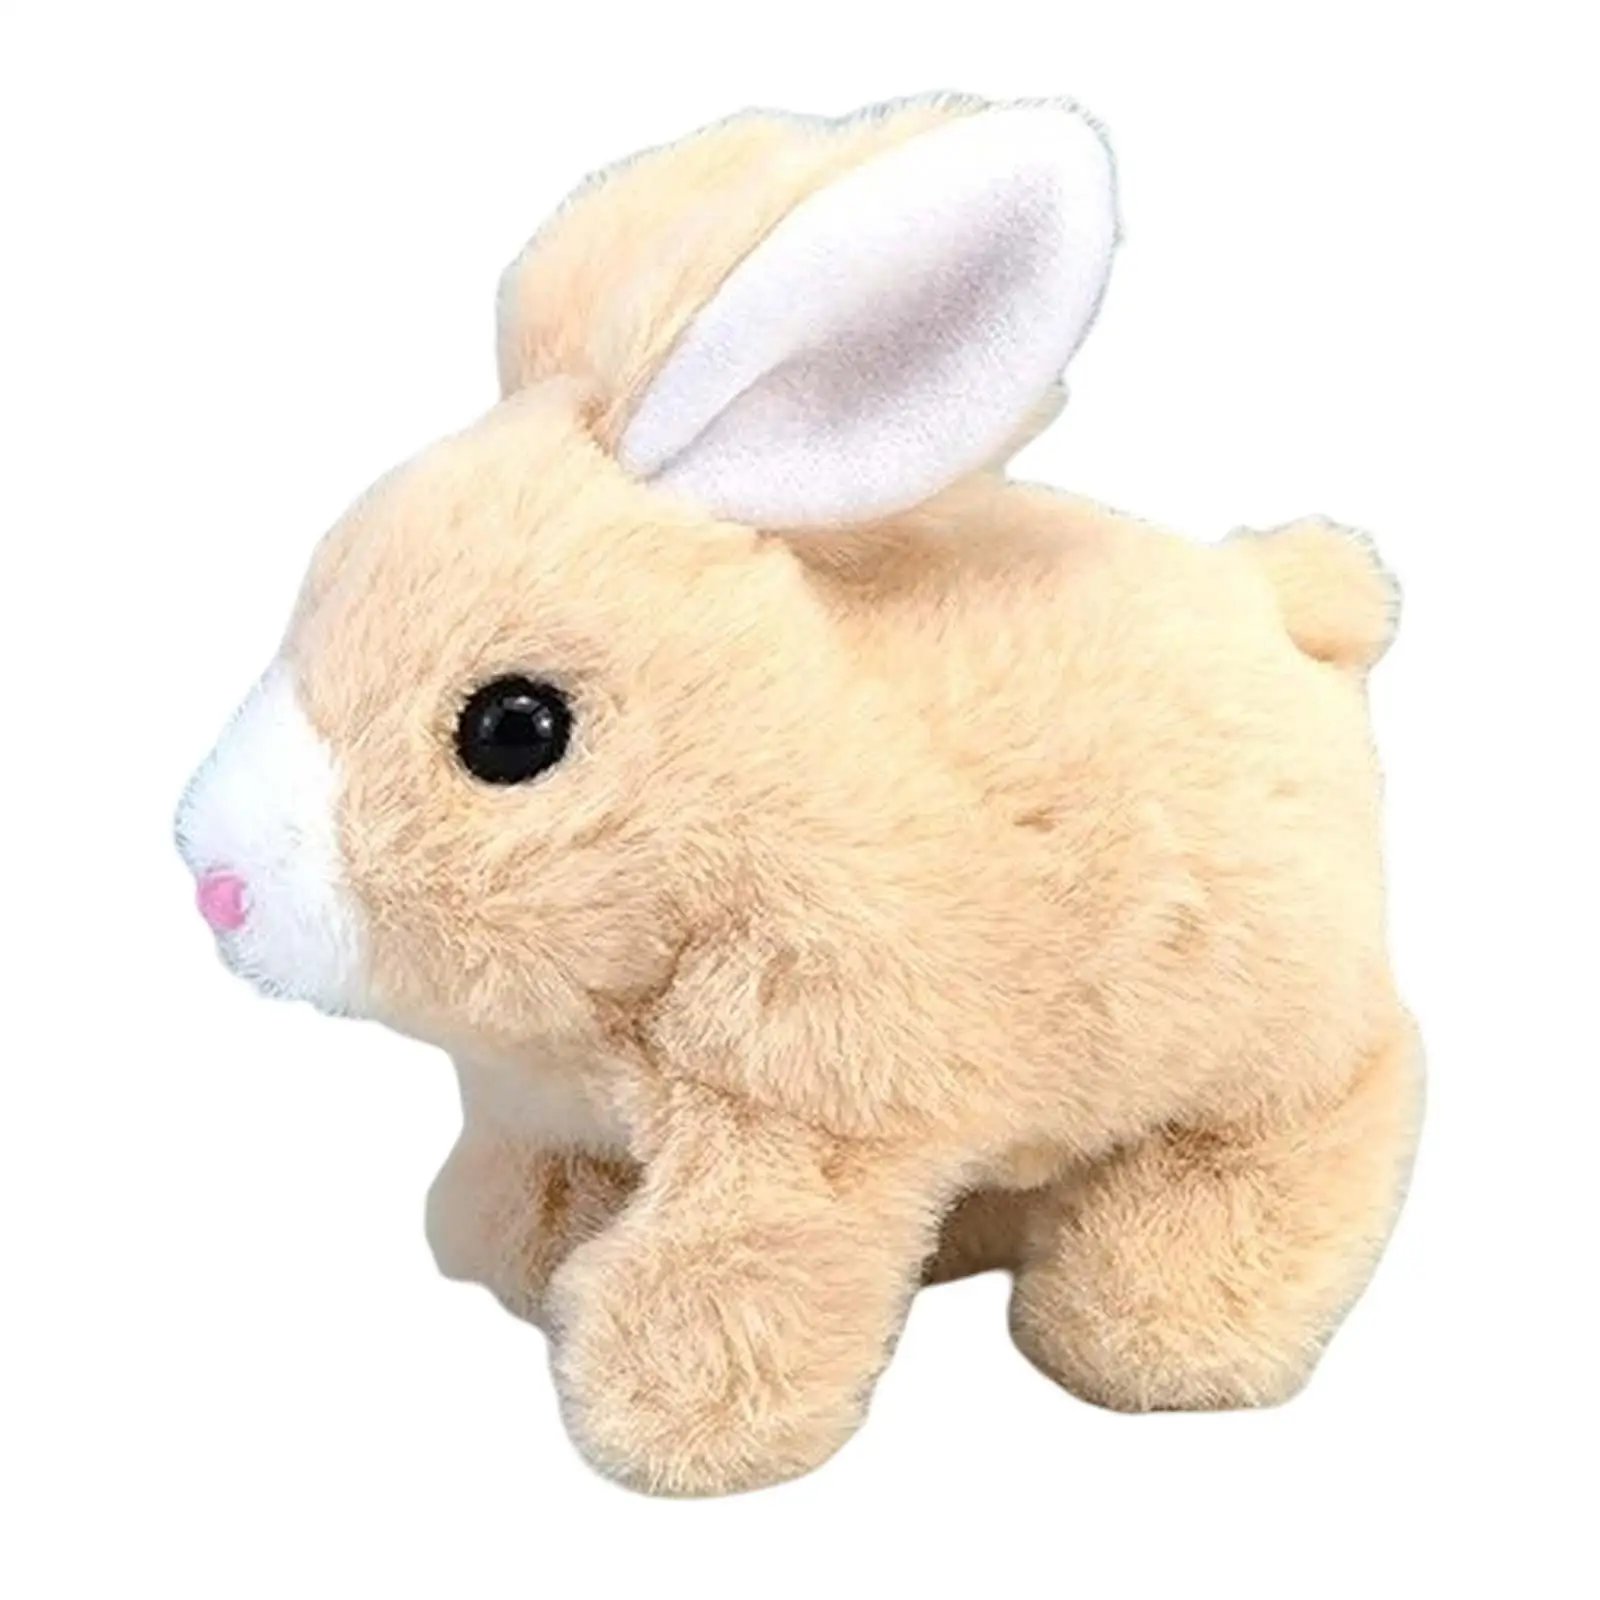 Electronic Rabbit Interactive Plush Toy Wiggling Ears Early Education Toy Novelty with Sound for Bedtime Friend Kids Toy